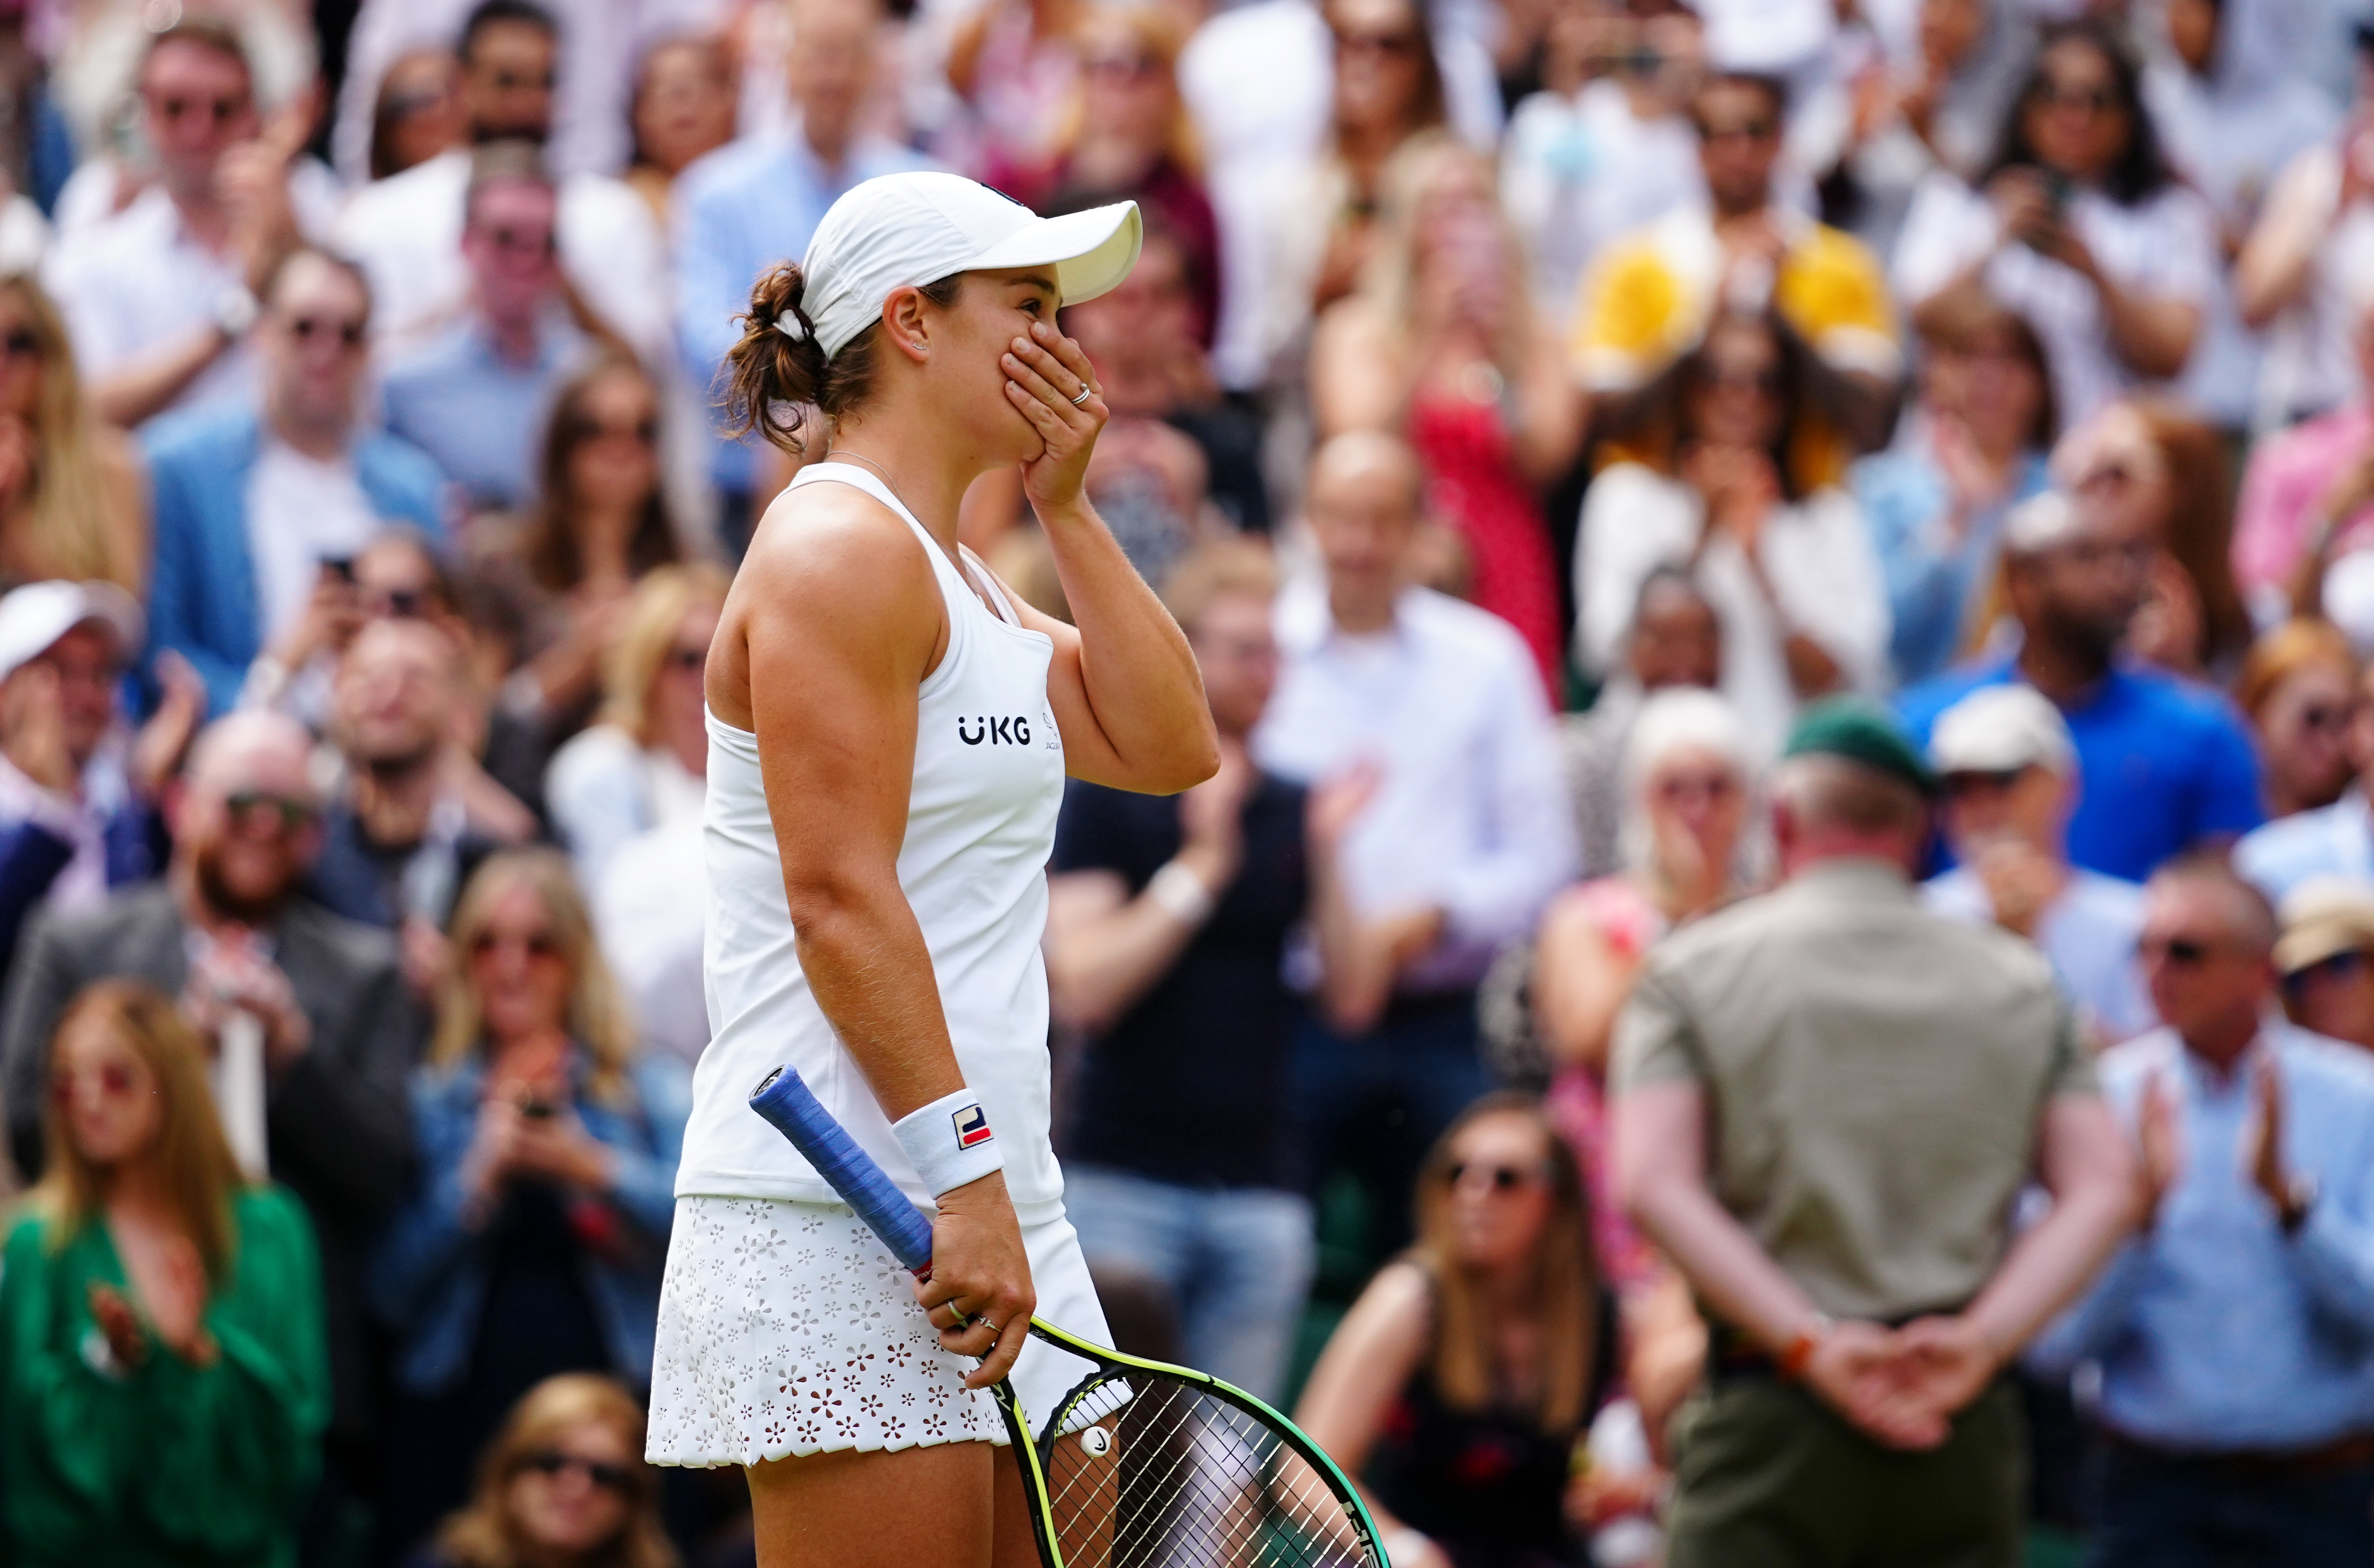 Ashleigh Barty vs Angelique Kerber, Wimbledon 2021 Live Streaming Online:  How to Watch Free Live Telecast of Women's Singles Semi-Final Tennis Match  in India?